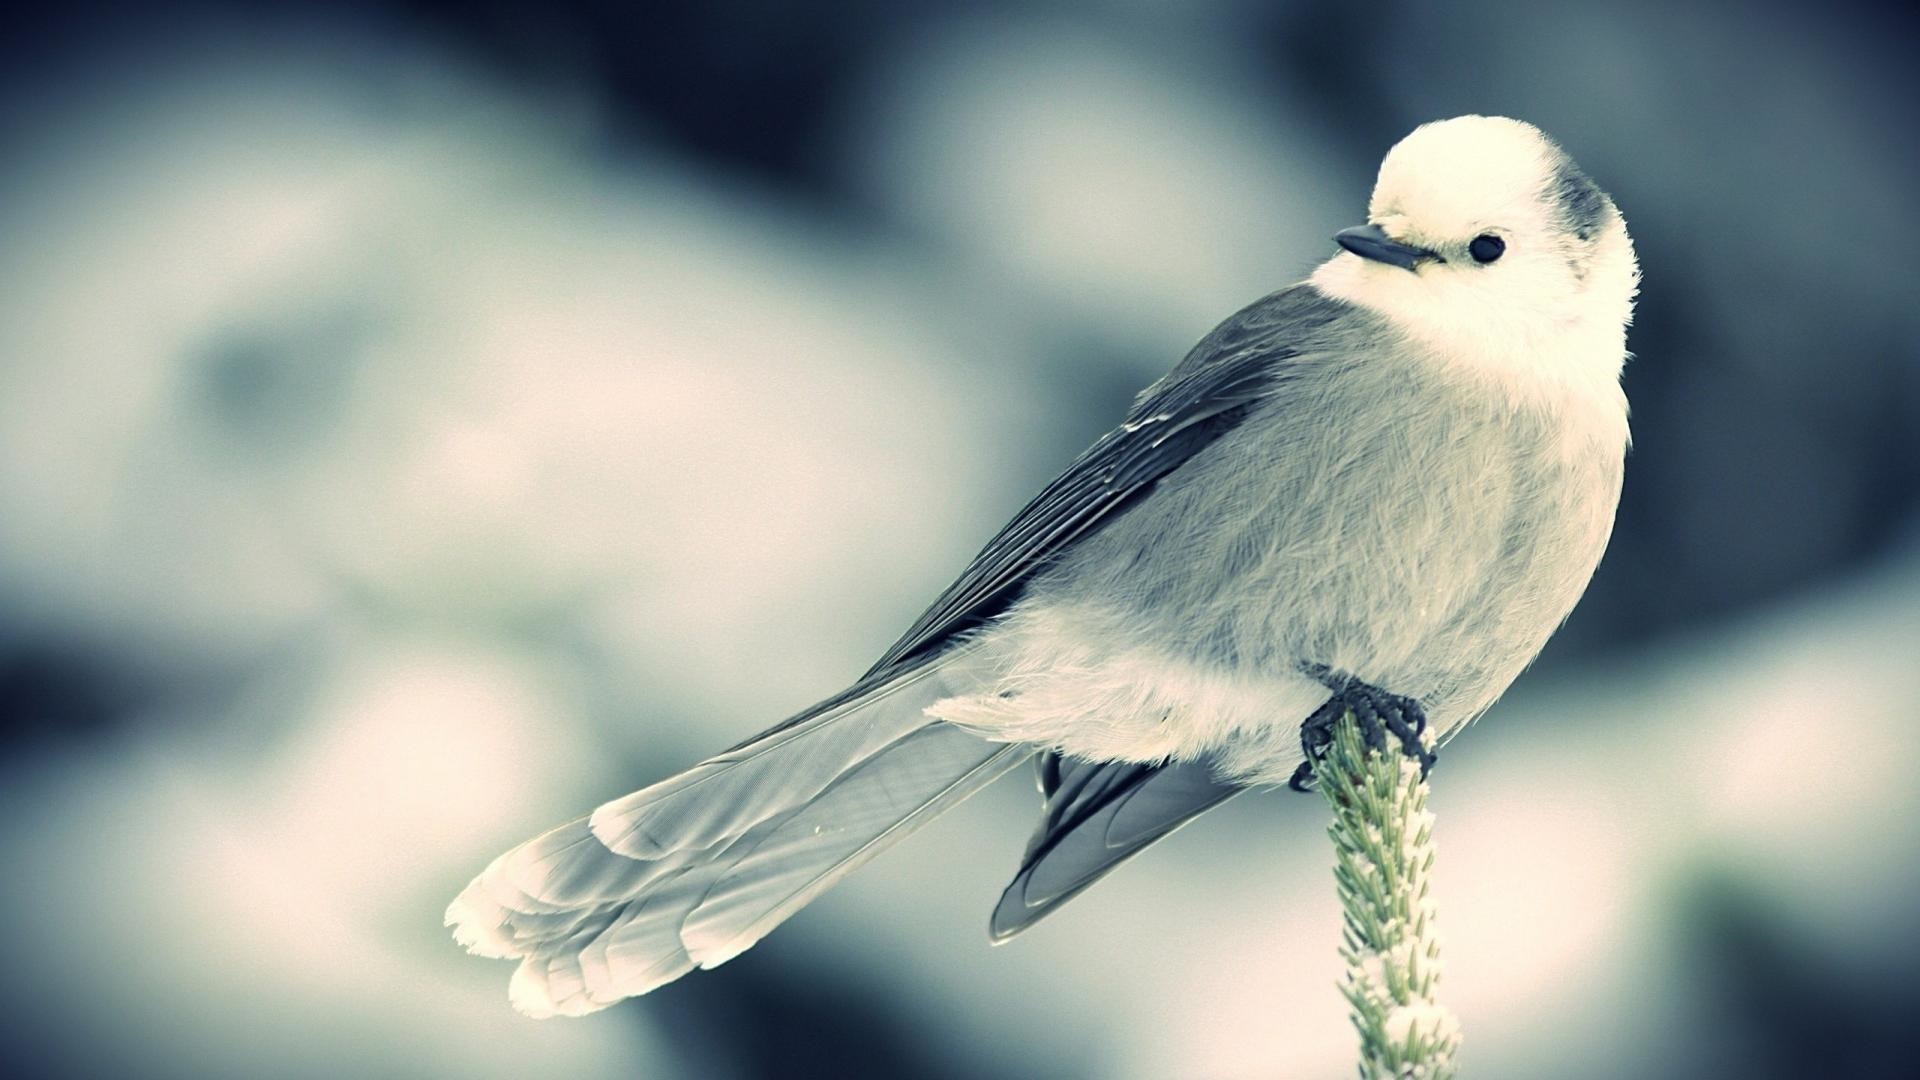 Beautiful Snow Bird On Branch Photos HD Wallpaper Image Pictures